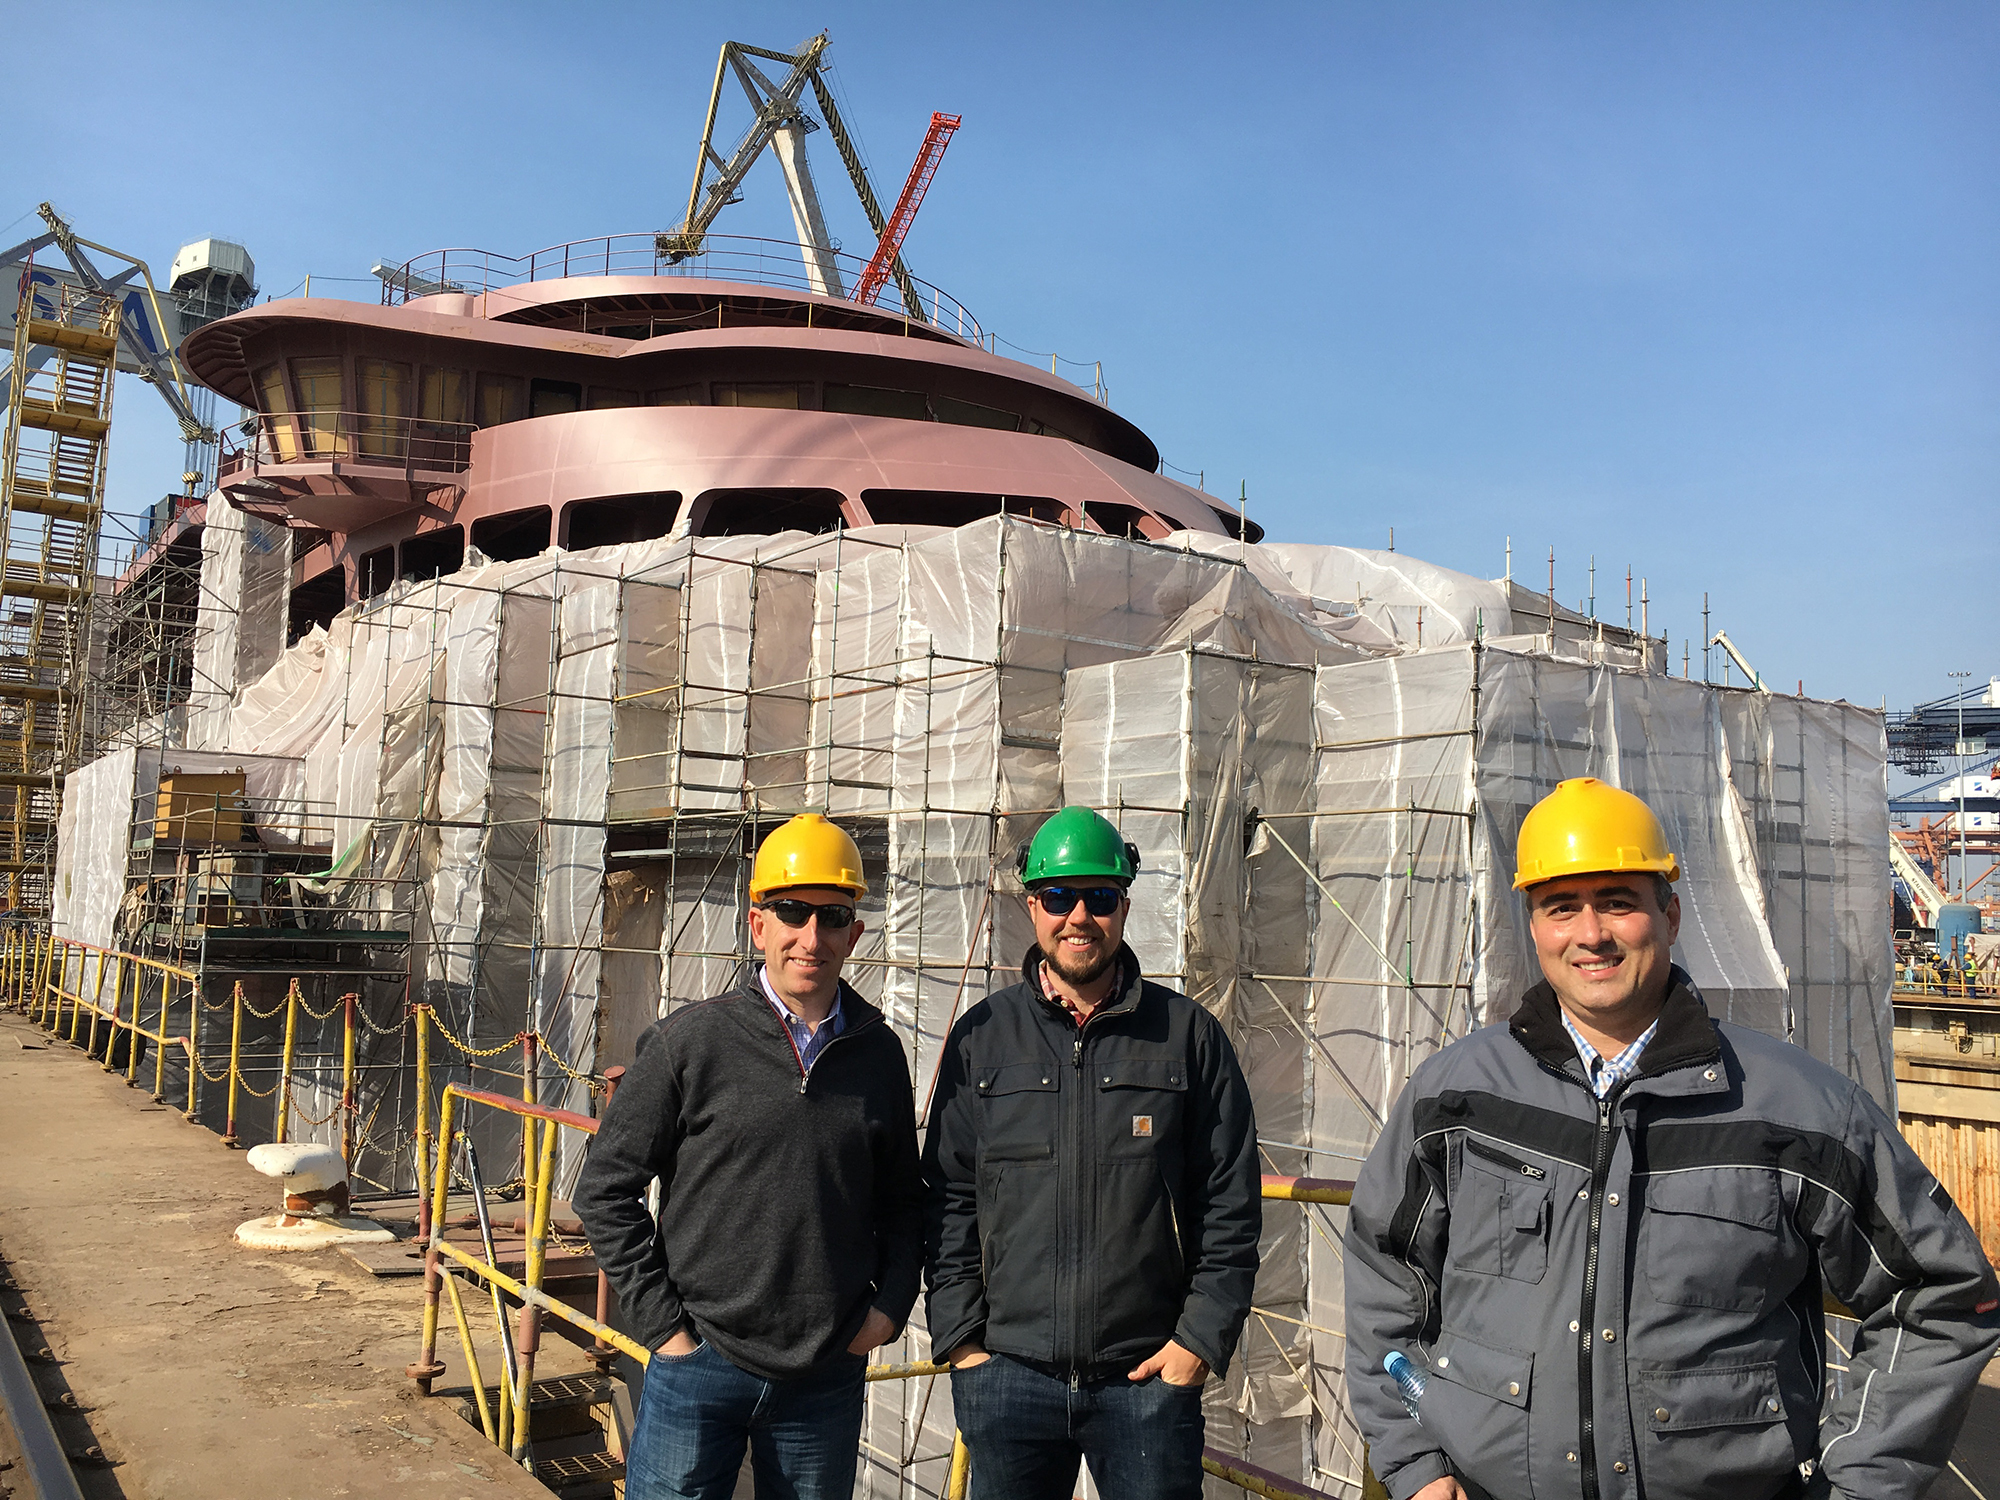 The Lindblad team on site at the hull yard, from left CFO Craig Felenstein, site manager Reed Ameel and senior vice president newbuilding, Nikos Doulis. Reed and Nikos will also be site representatives at Ulstein Verft.